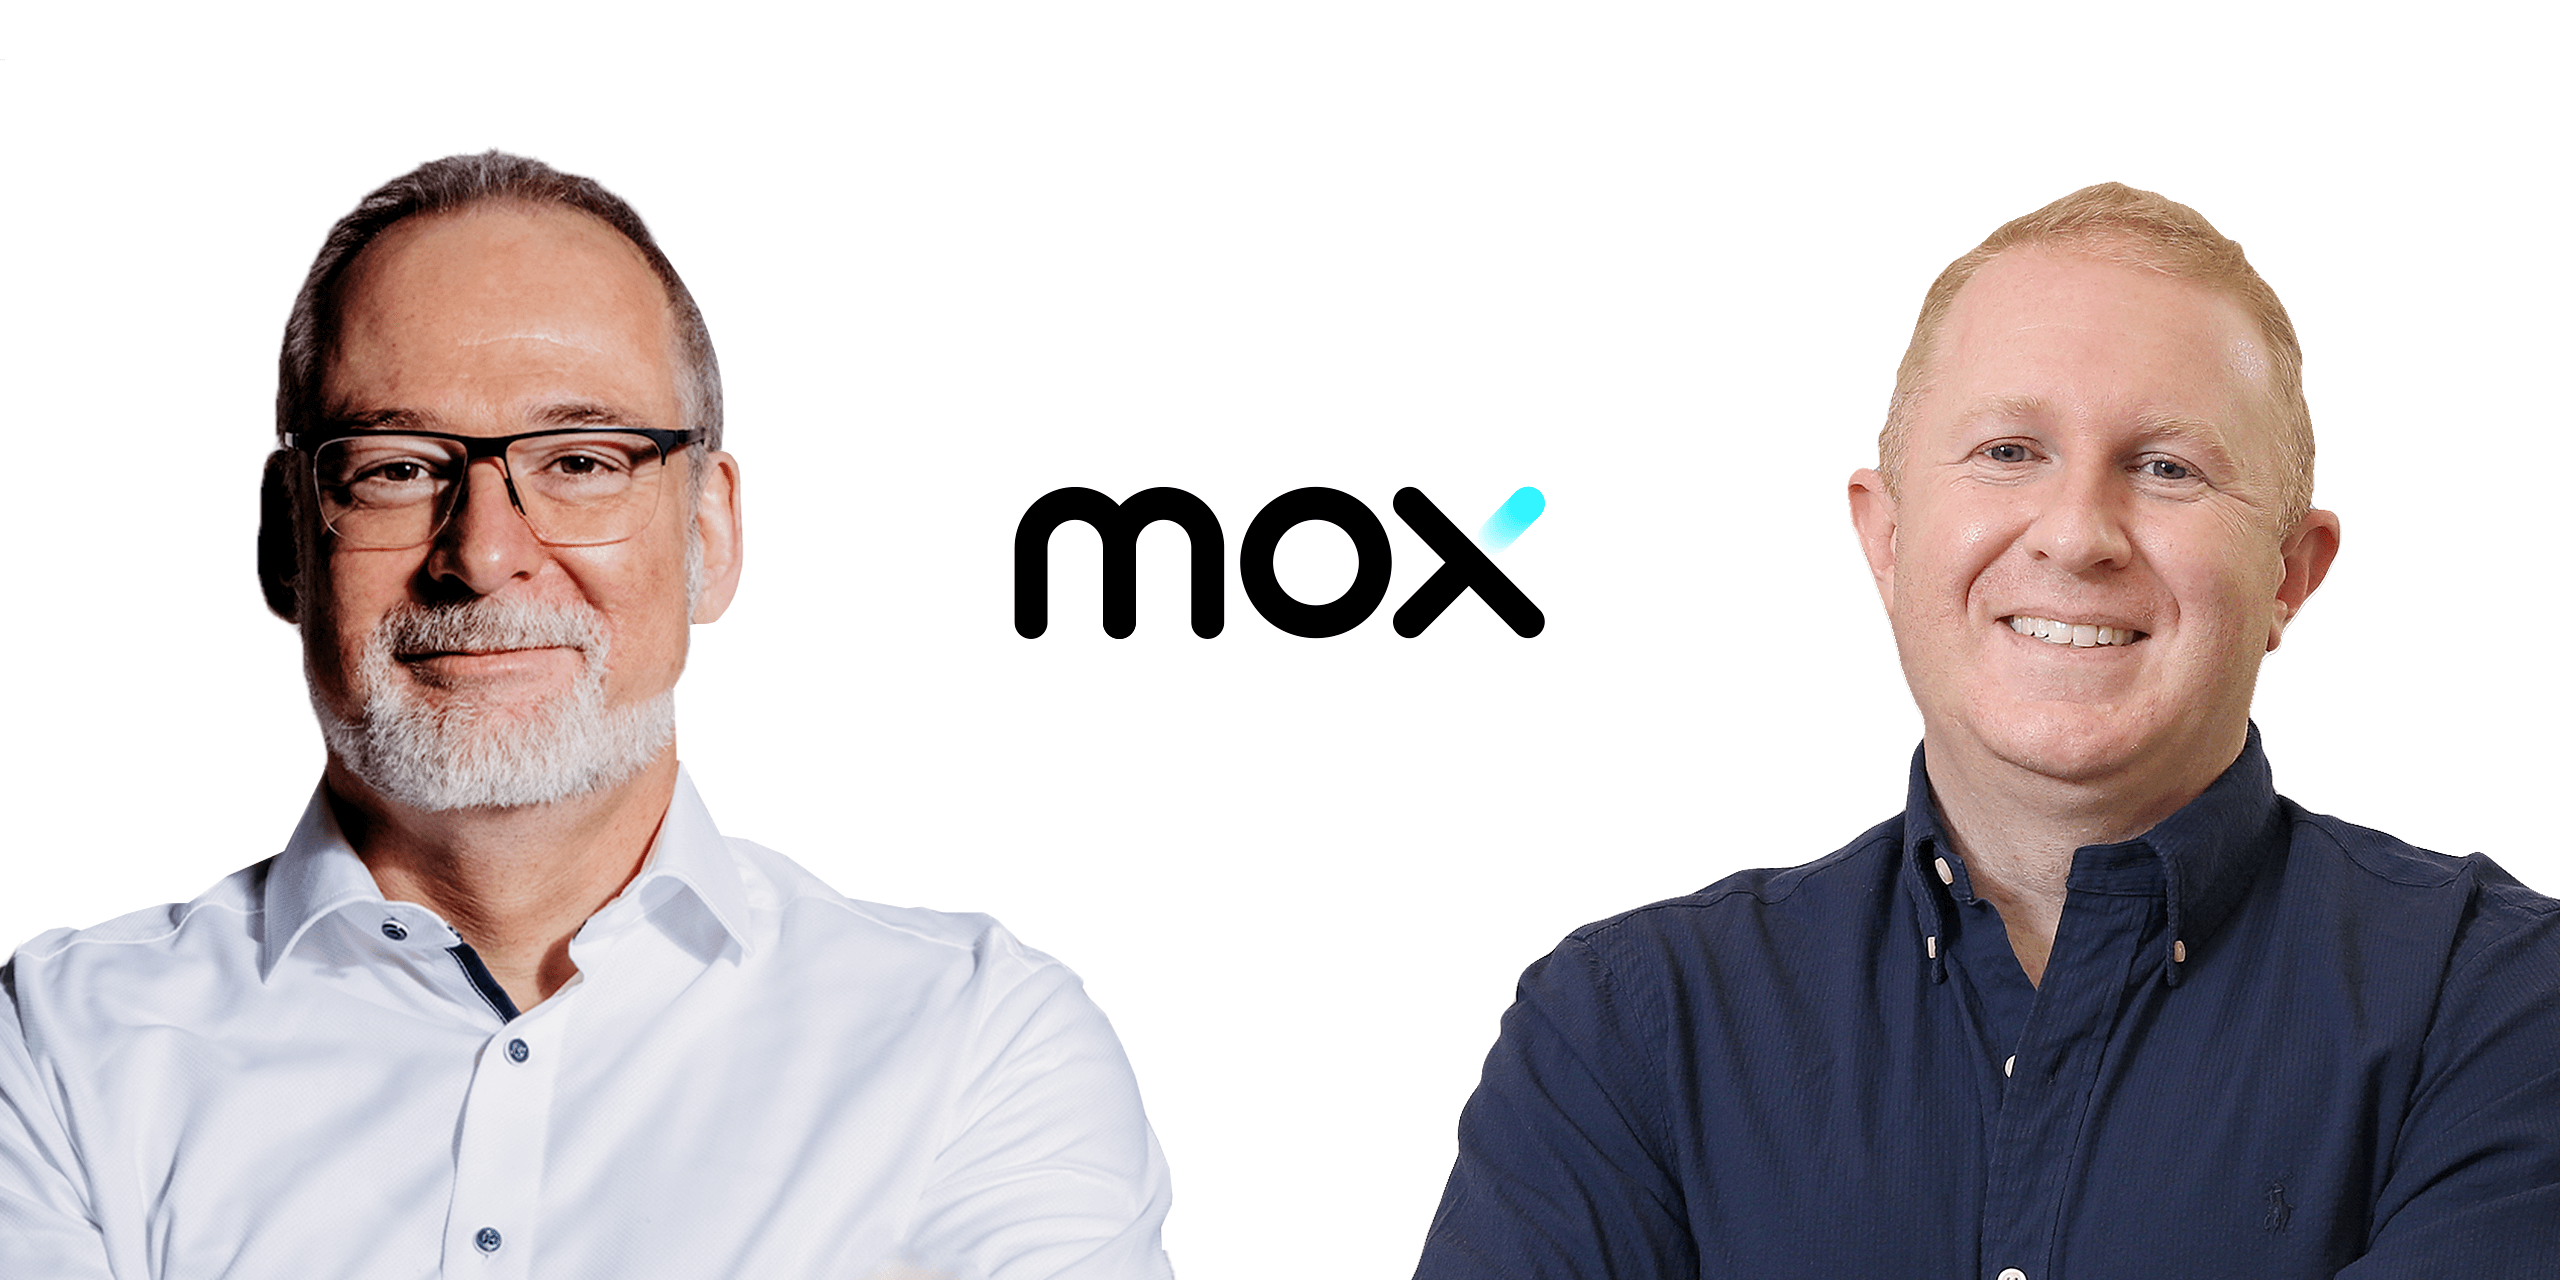 Mox announces two significant appointments to drive its vision of becoming the global benchmark for Digital Banks